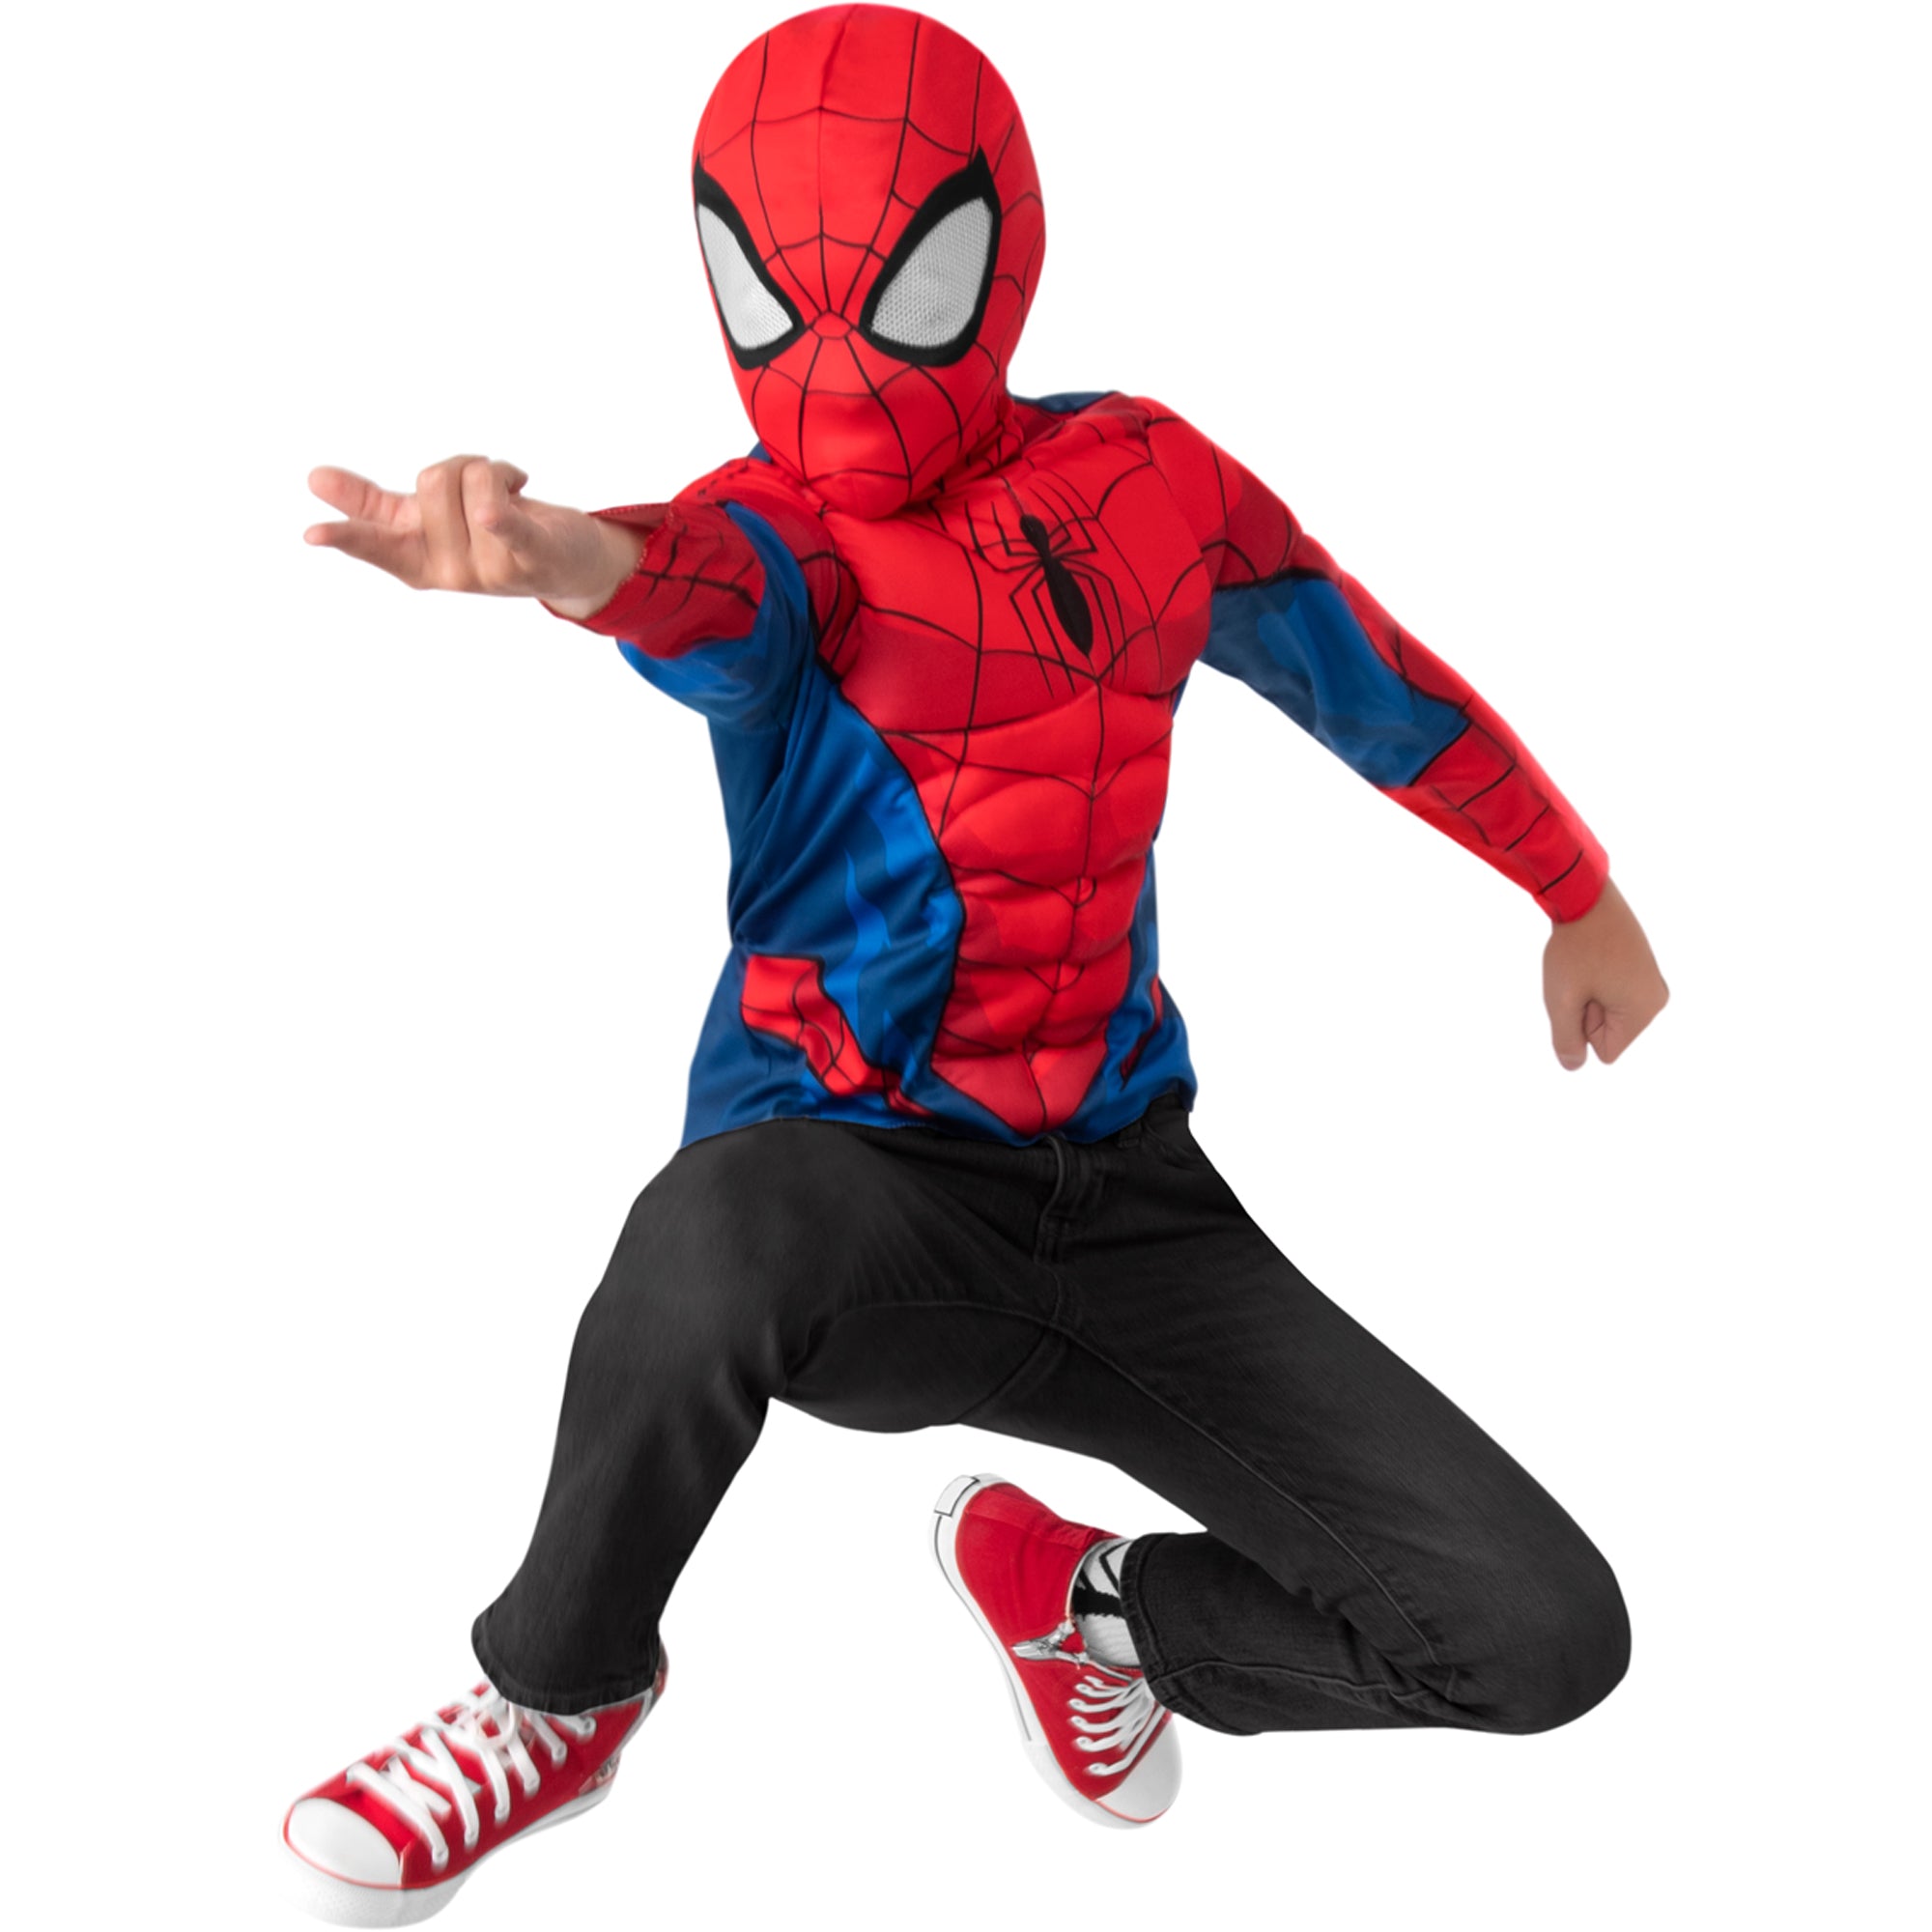 Marvel Spider-Man Deluxe Costume for Kids | Party Expert